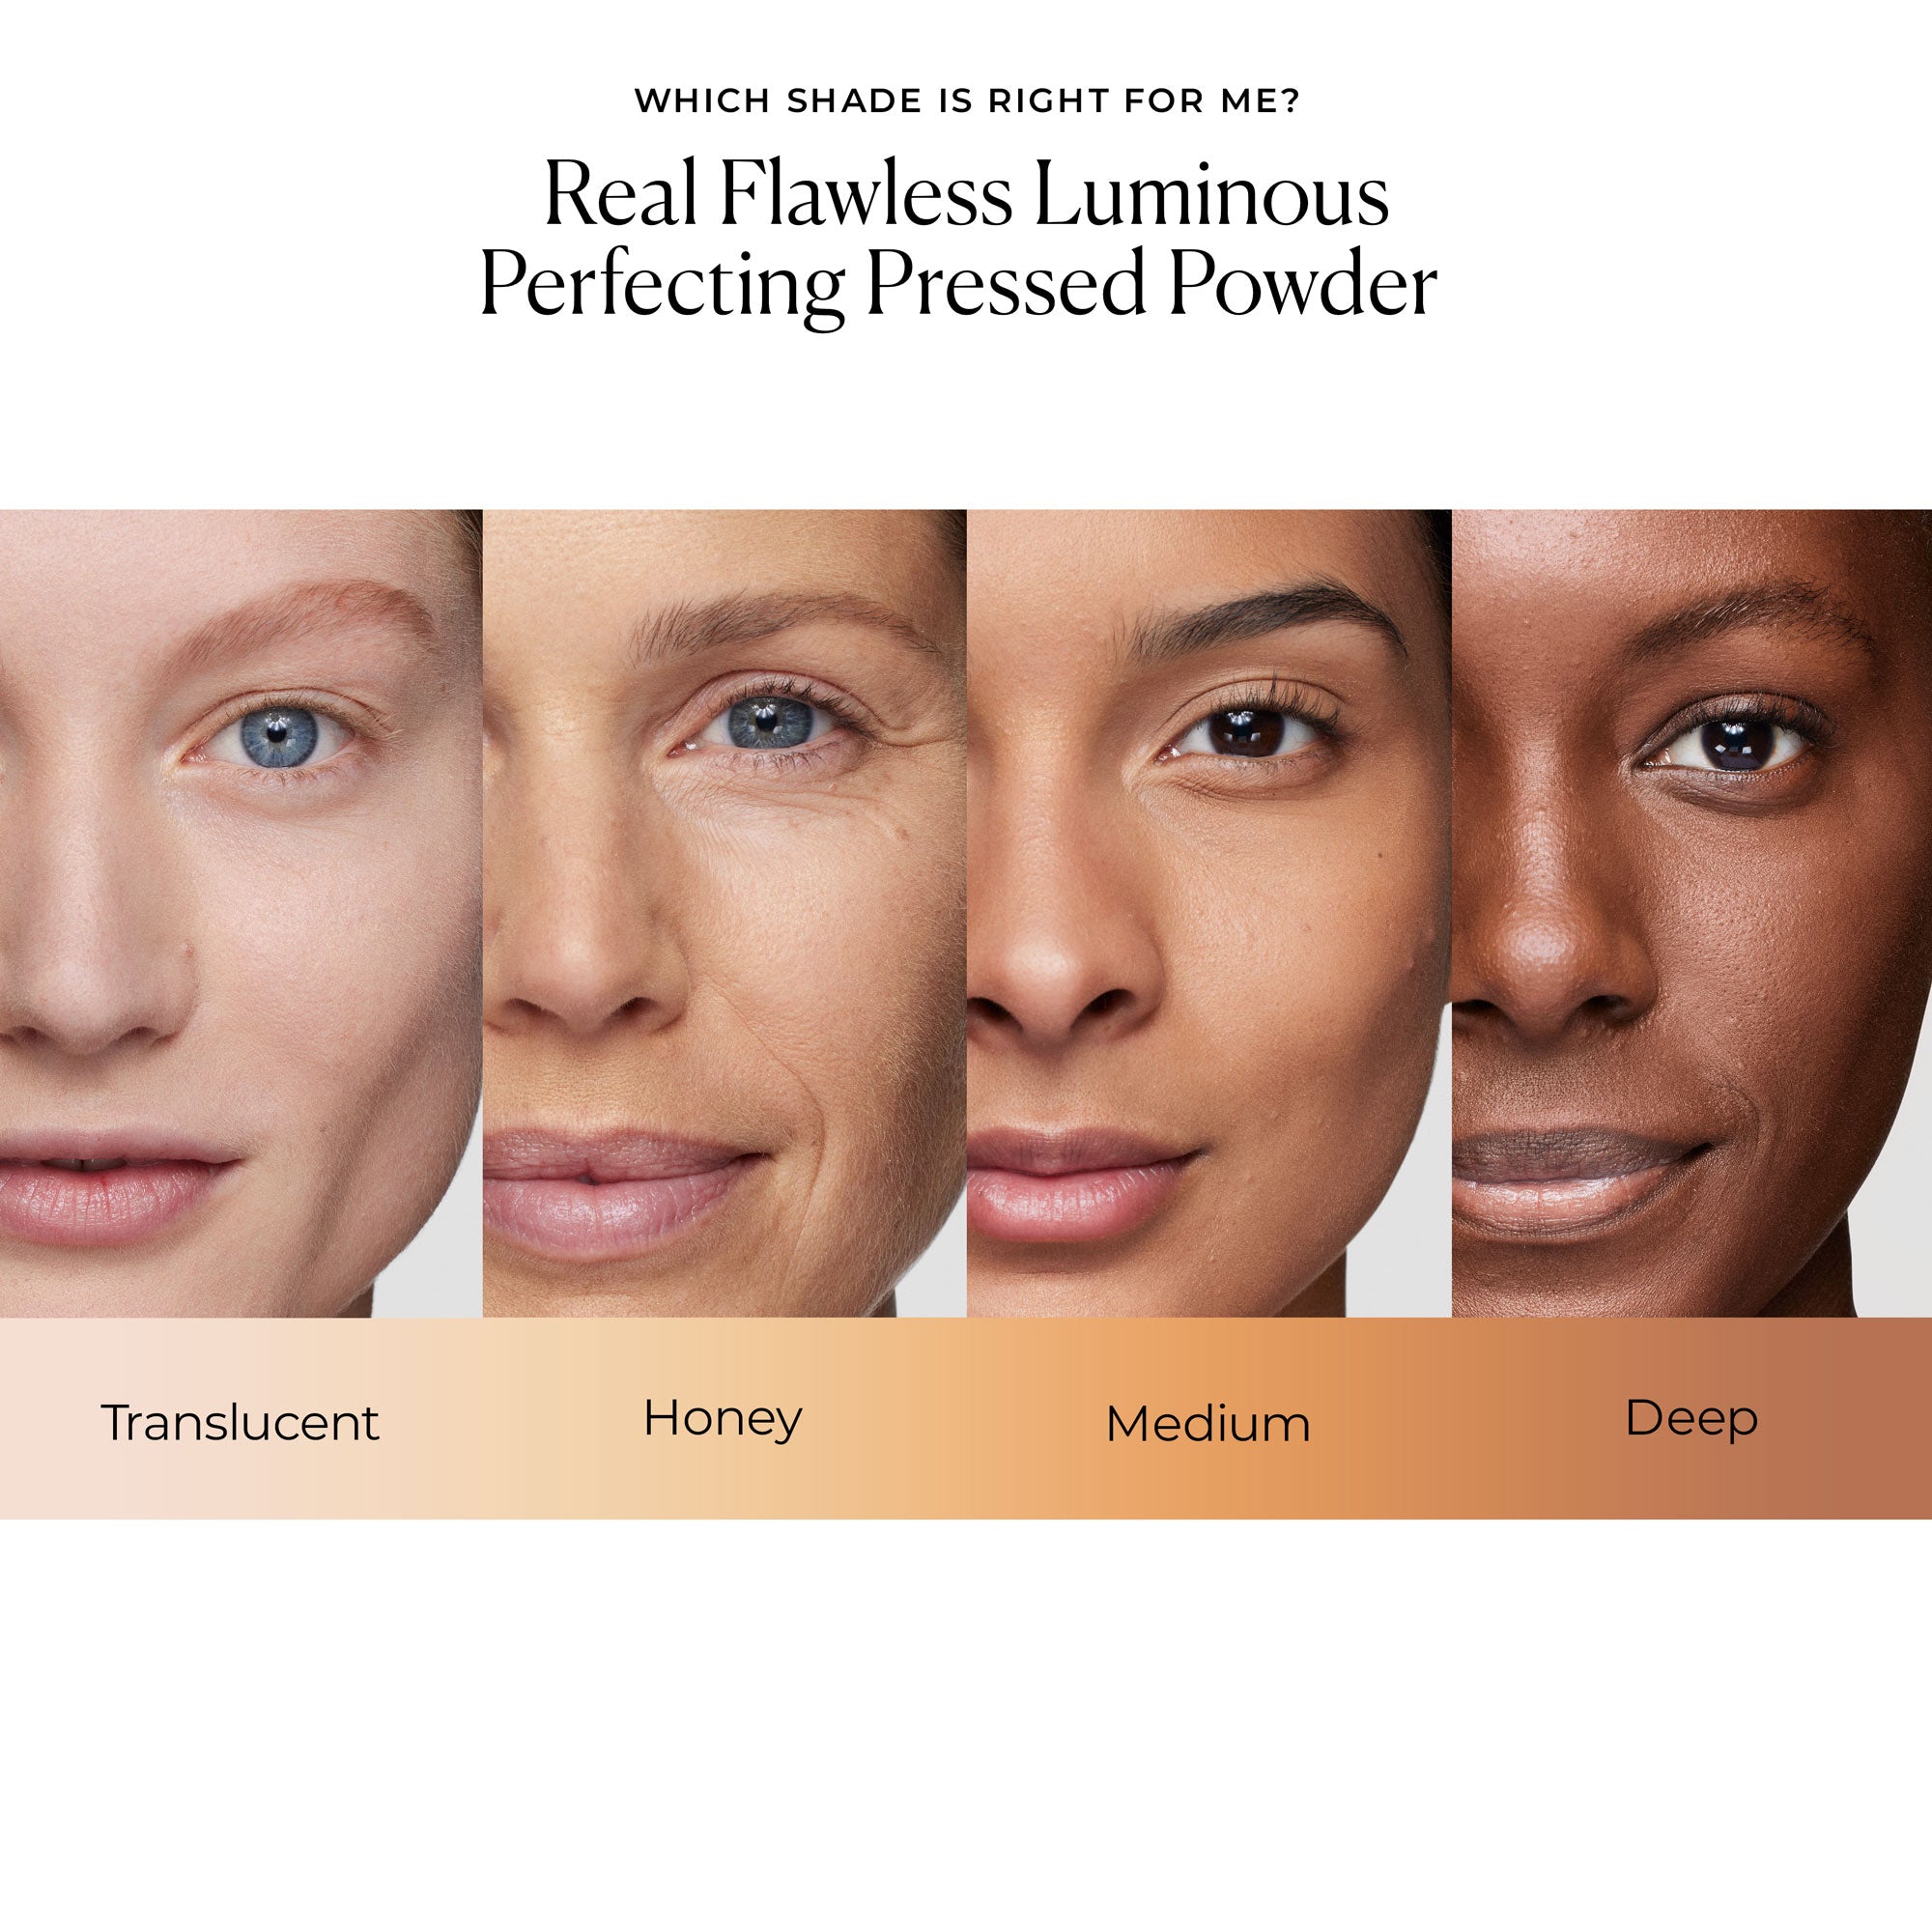 Real Flawless Luminous Perfecting Pressed Powder - View 32